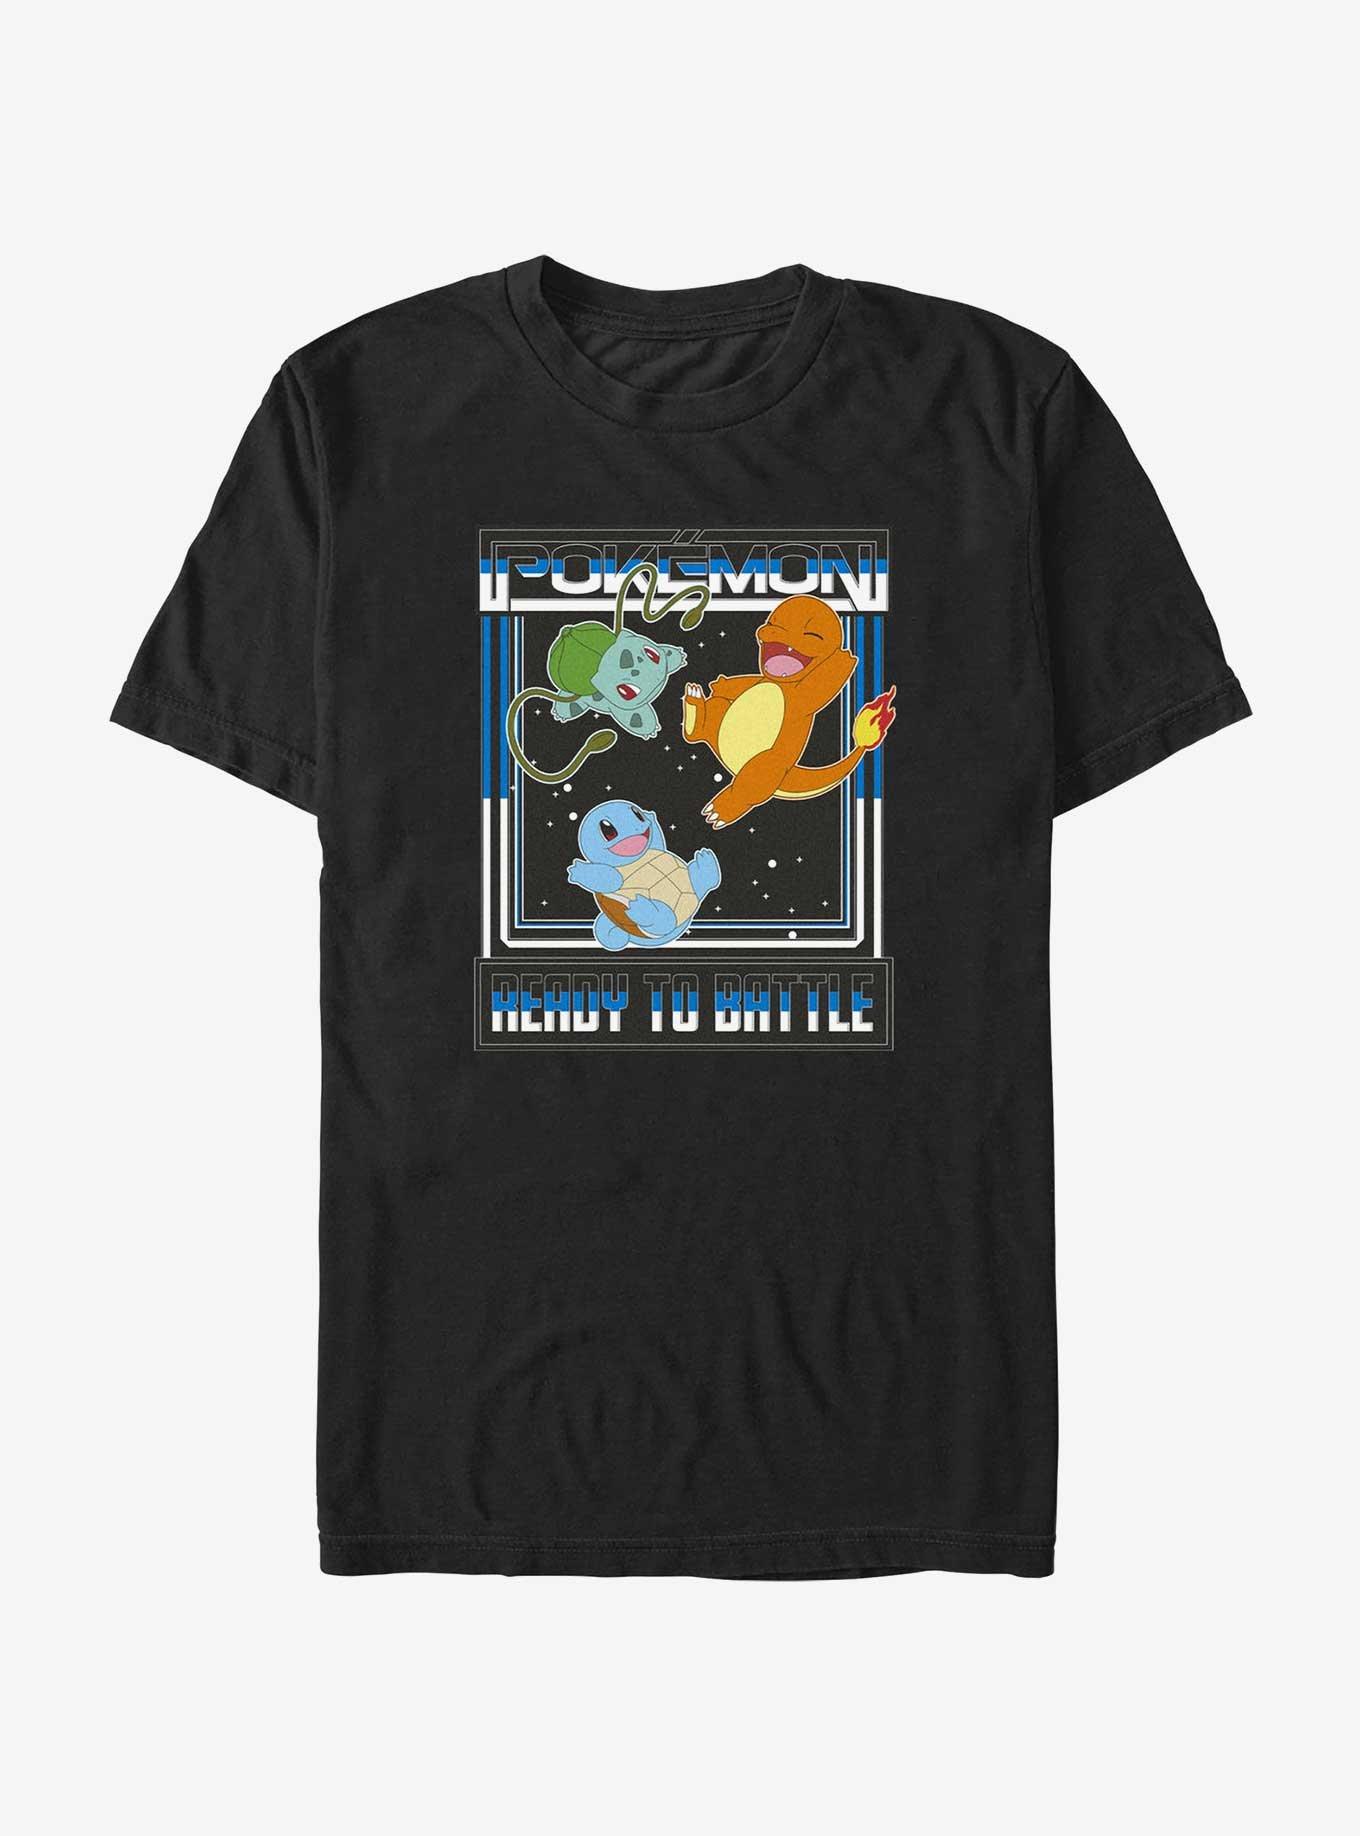 Pokemon Ready To Battle Squirtle, Bulbasaur, and Charmander T-Shirt, BLACK, hi-res